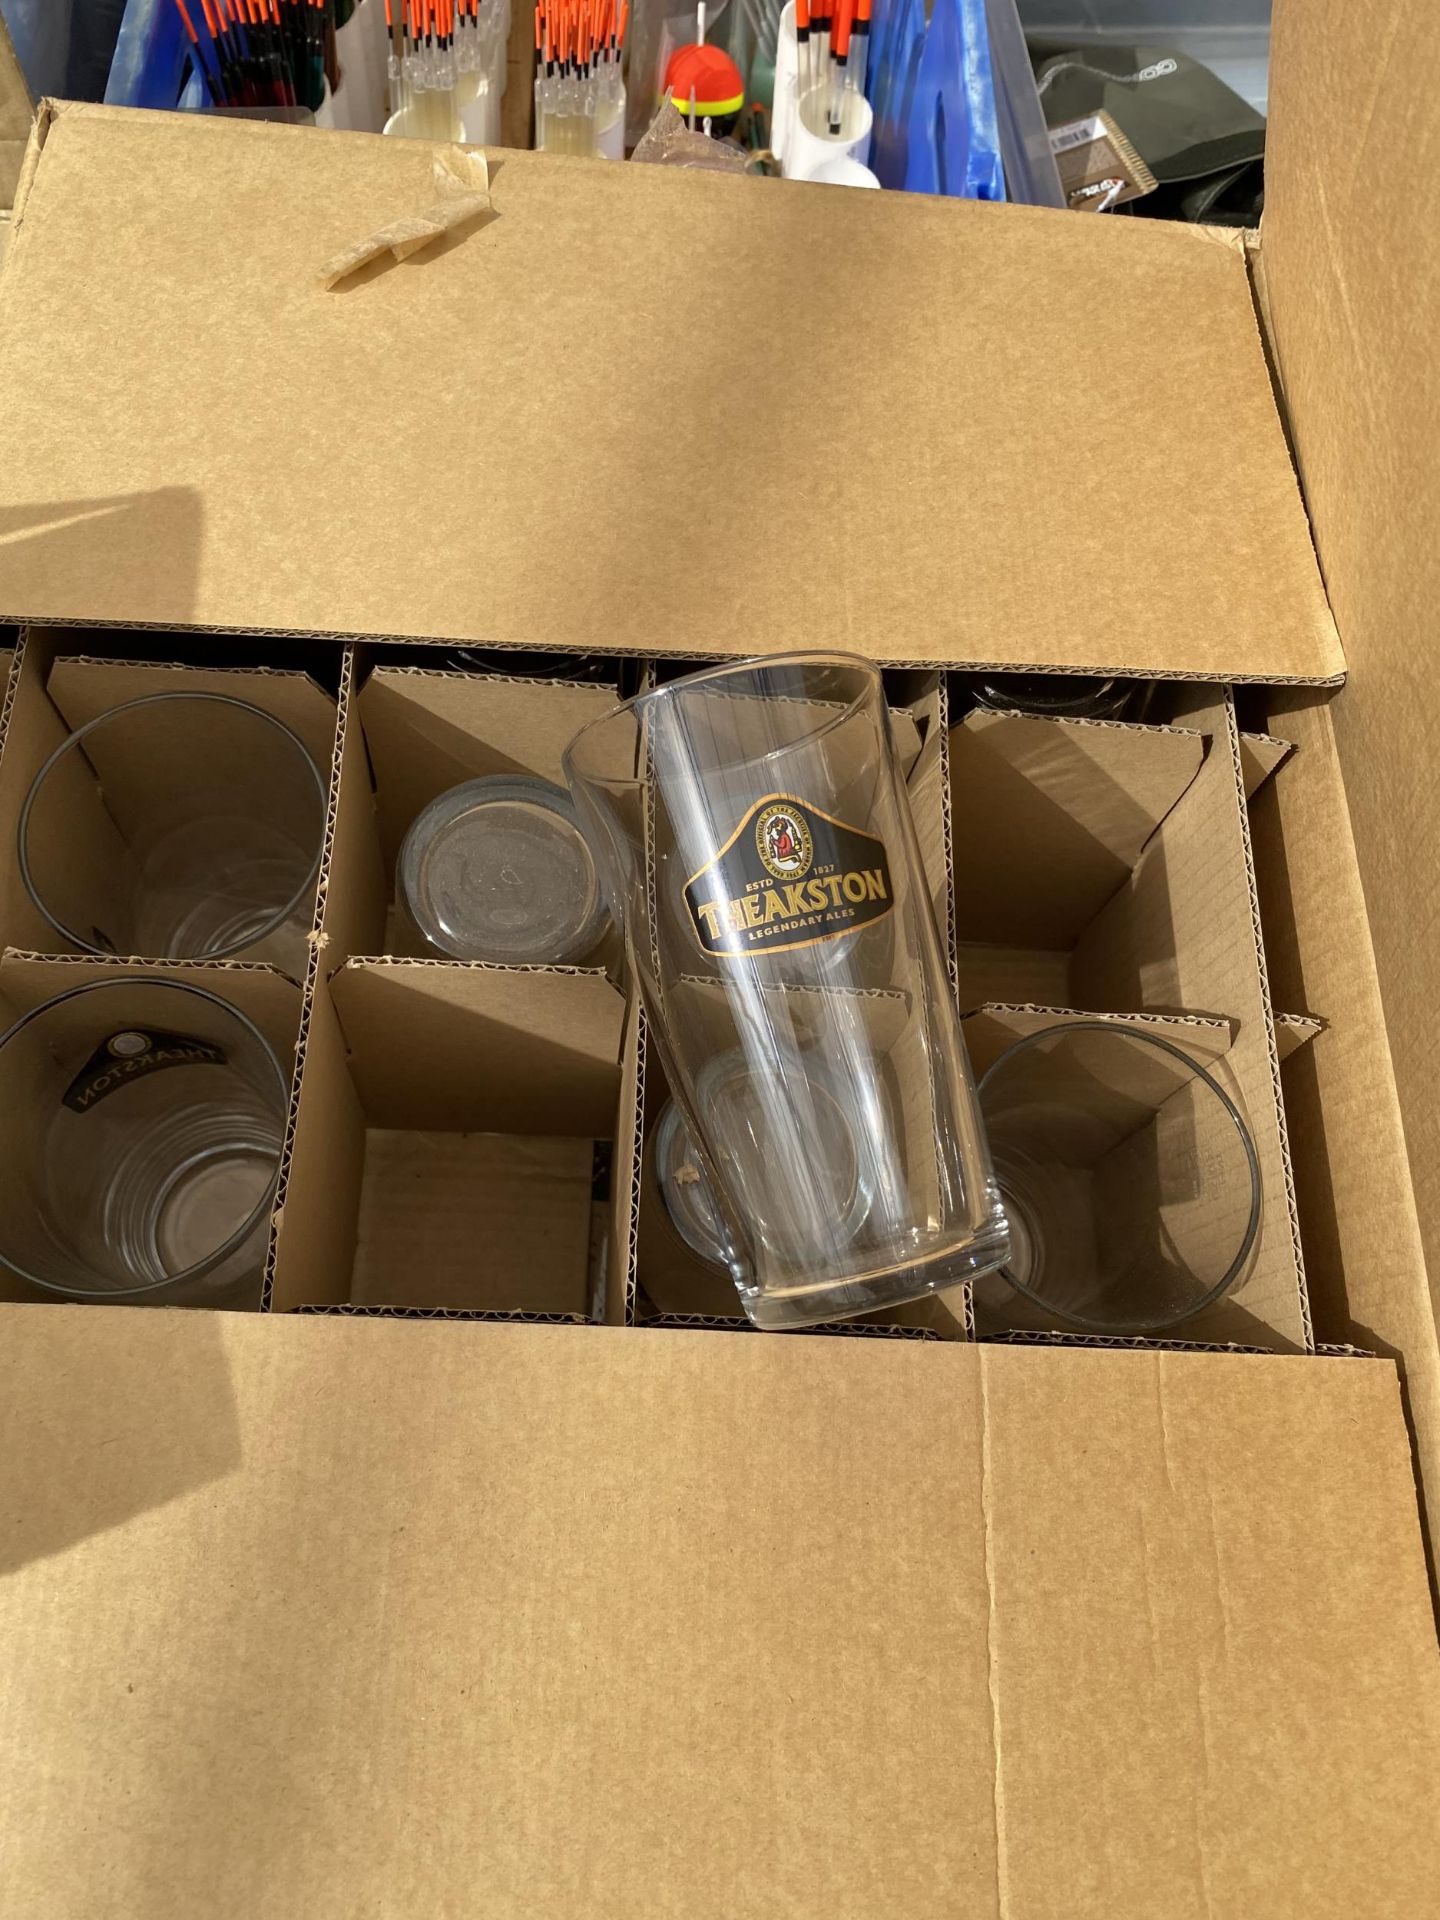 A GROUP OF BOXED PINT GLASSES - Image 2 of 3